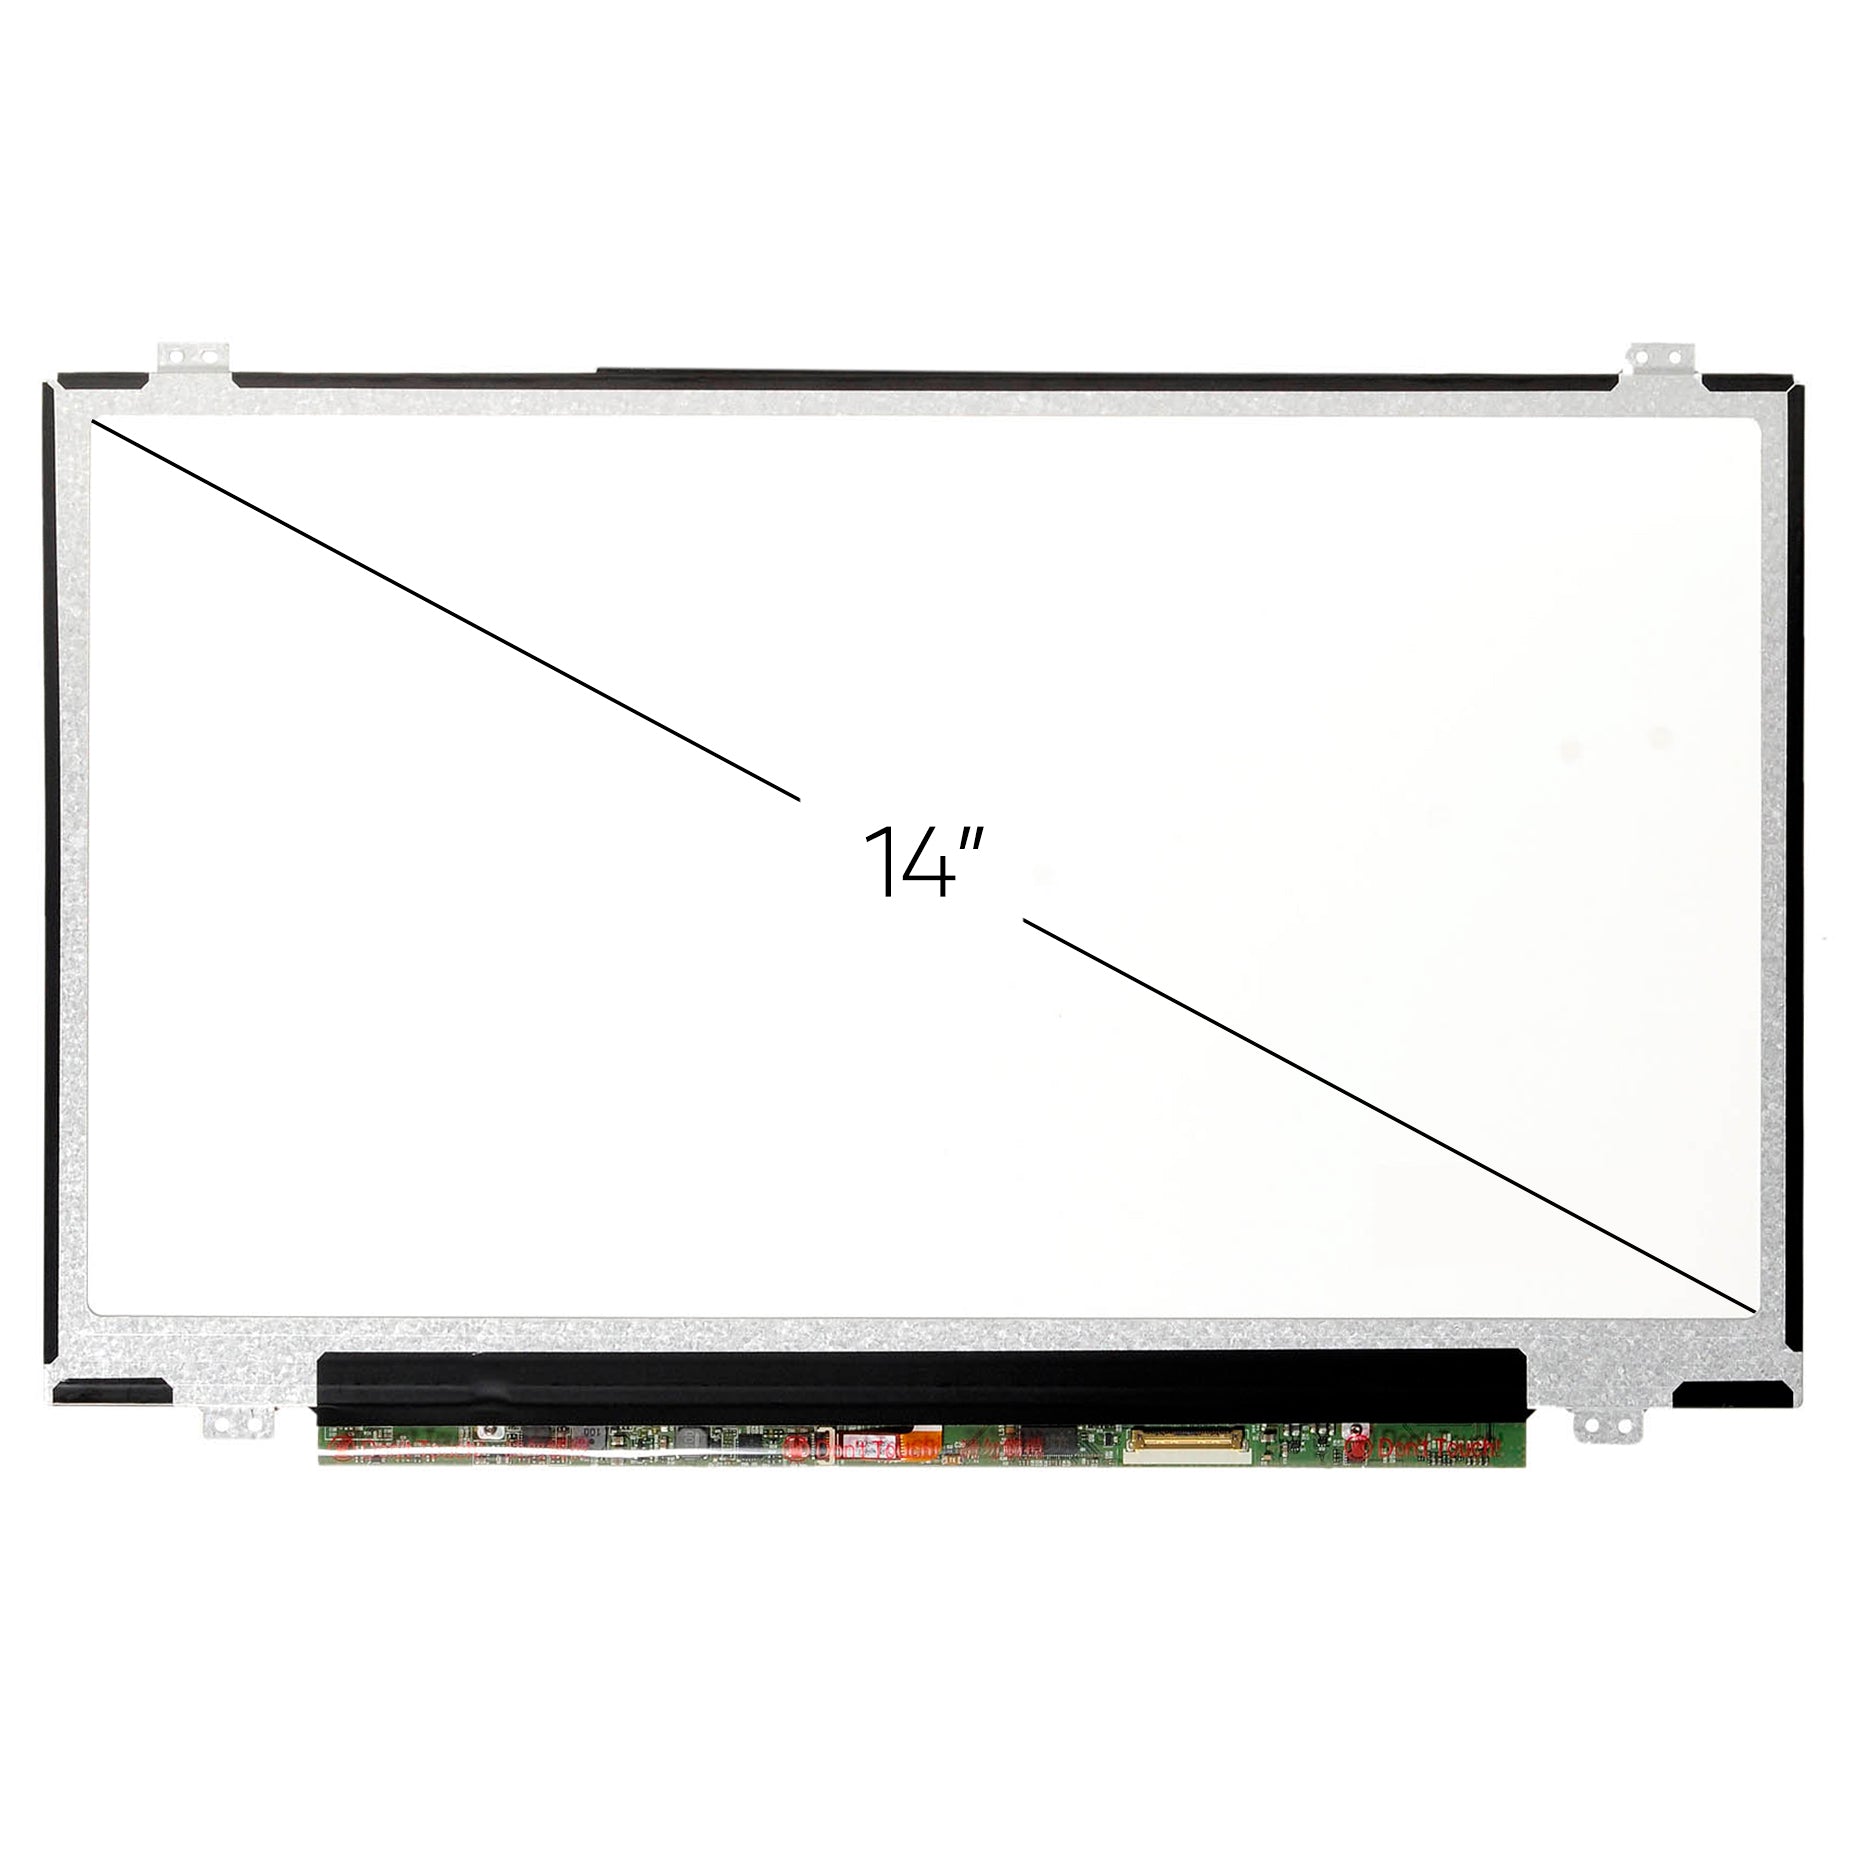 Screen Replacement for ASUS Zenbook UX430UA-DH74 FHD 1920x1080 IPS Matte LCD LED Display